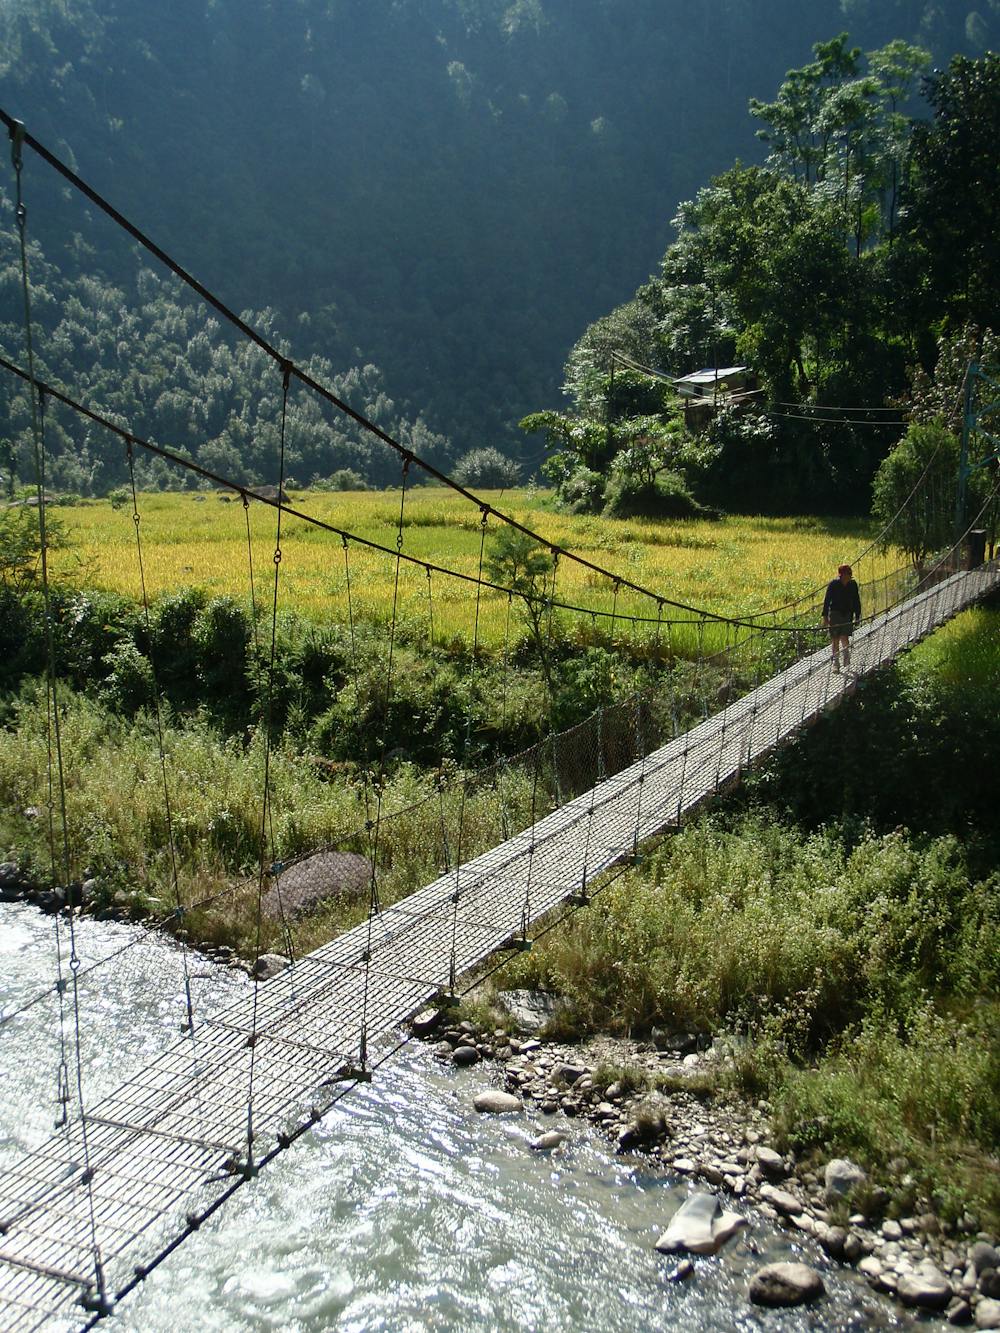 Peace, serenity and a happily solid Nepalese bridge!